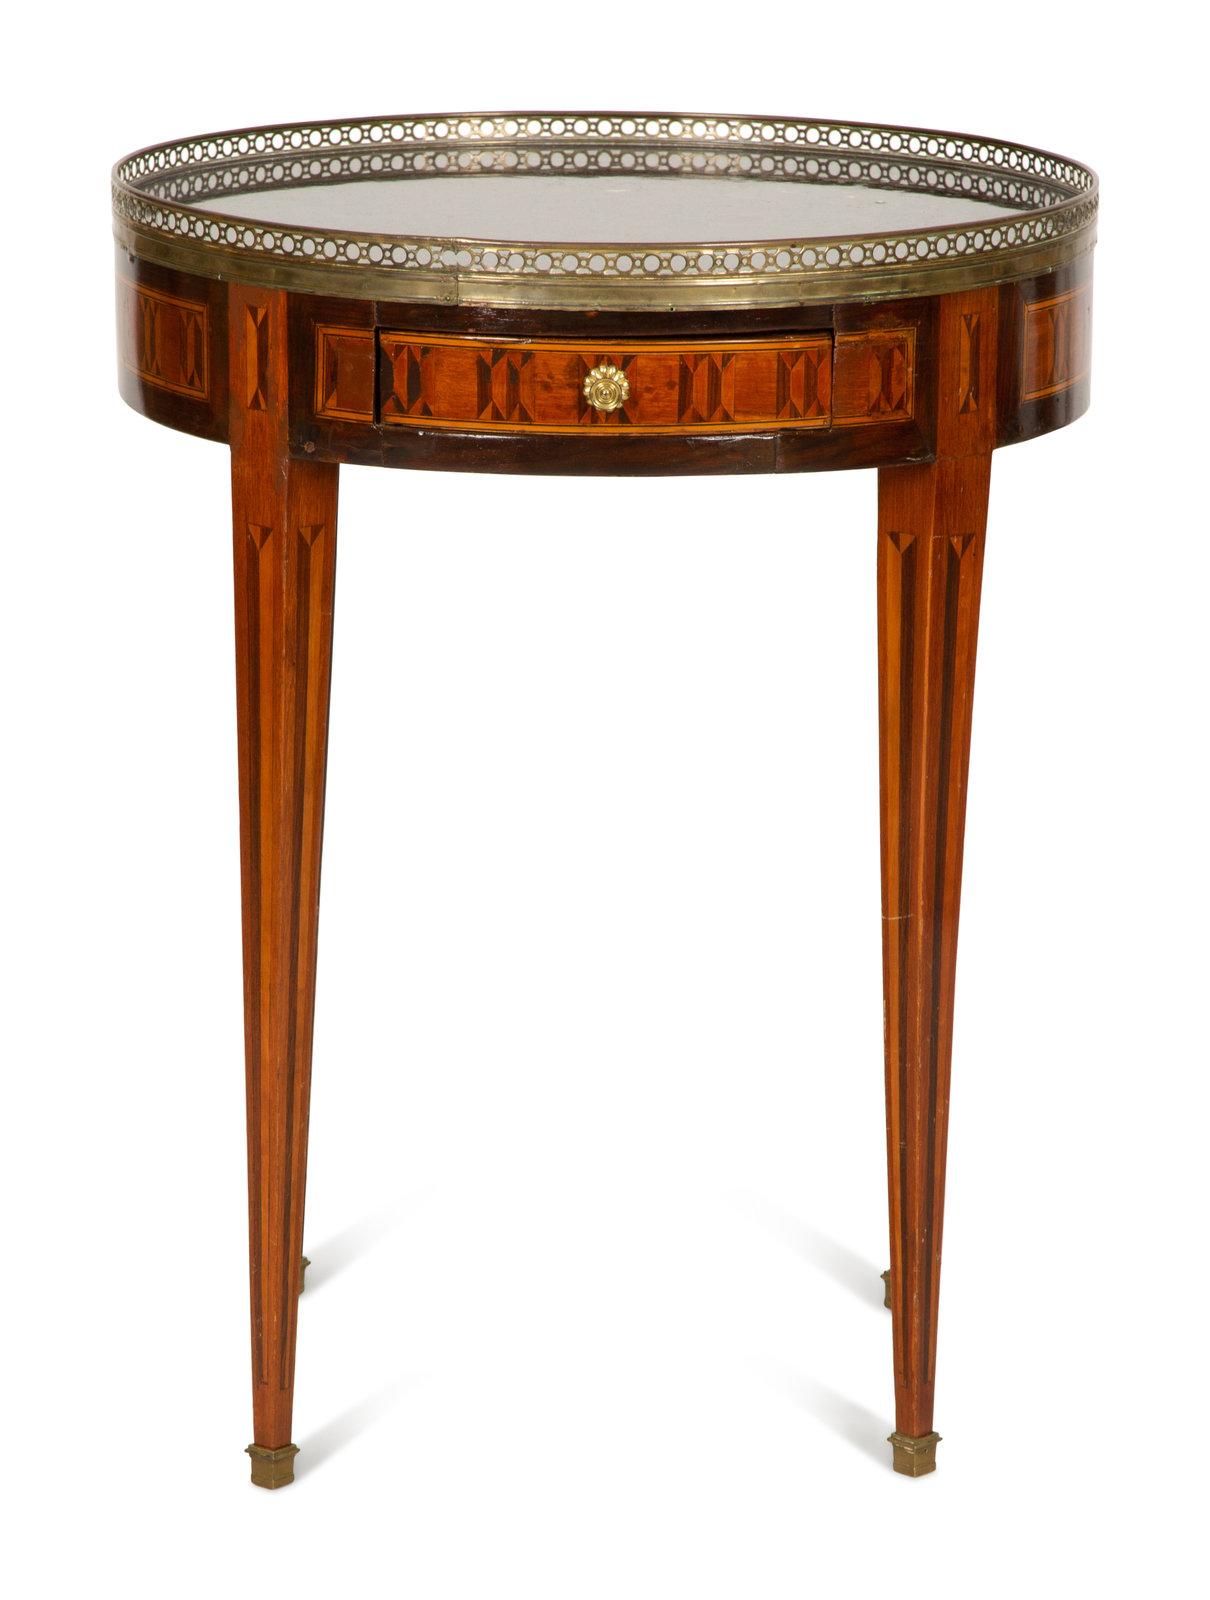 Louis XVI Style Marquetry Marble-Top Gueridon with a Brass Gallery, Early 20th Century. Measures: Height 31 1/2 x diameter 24 inches.
 